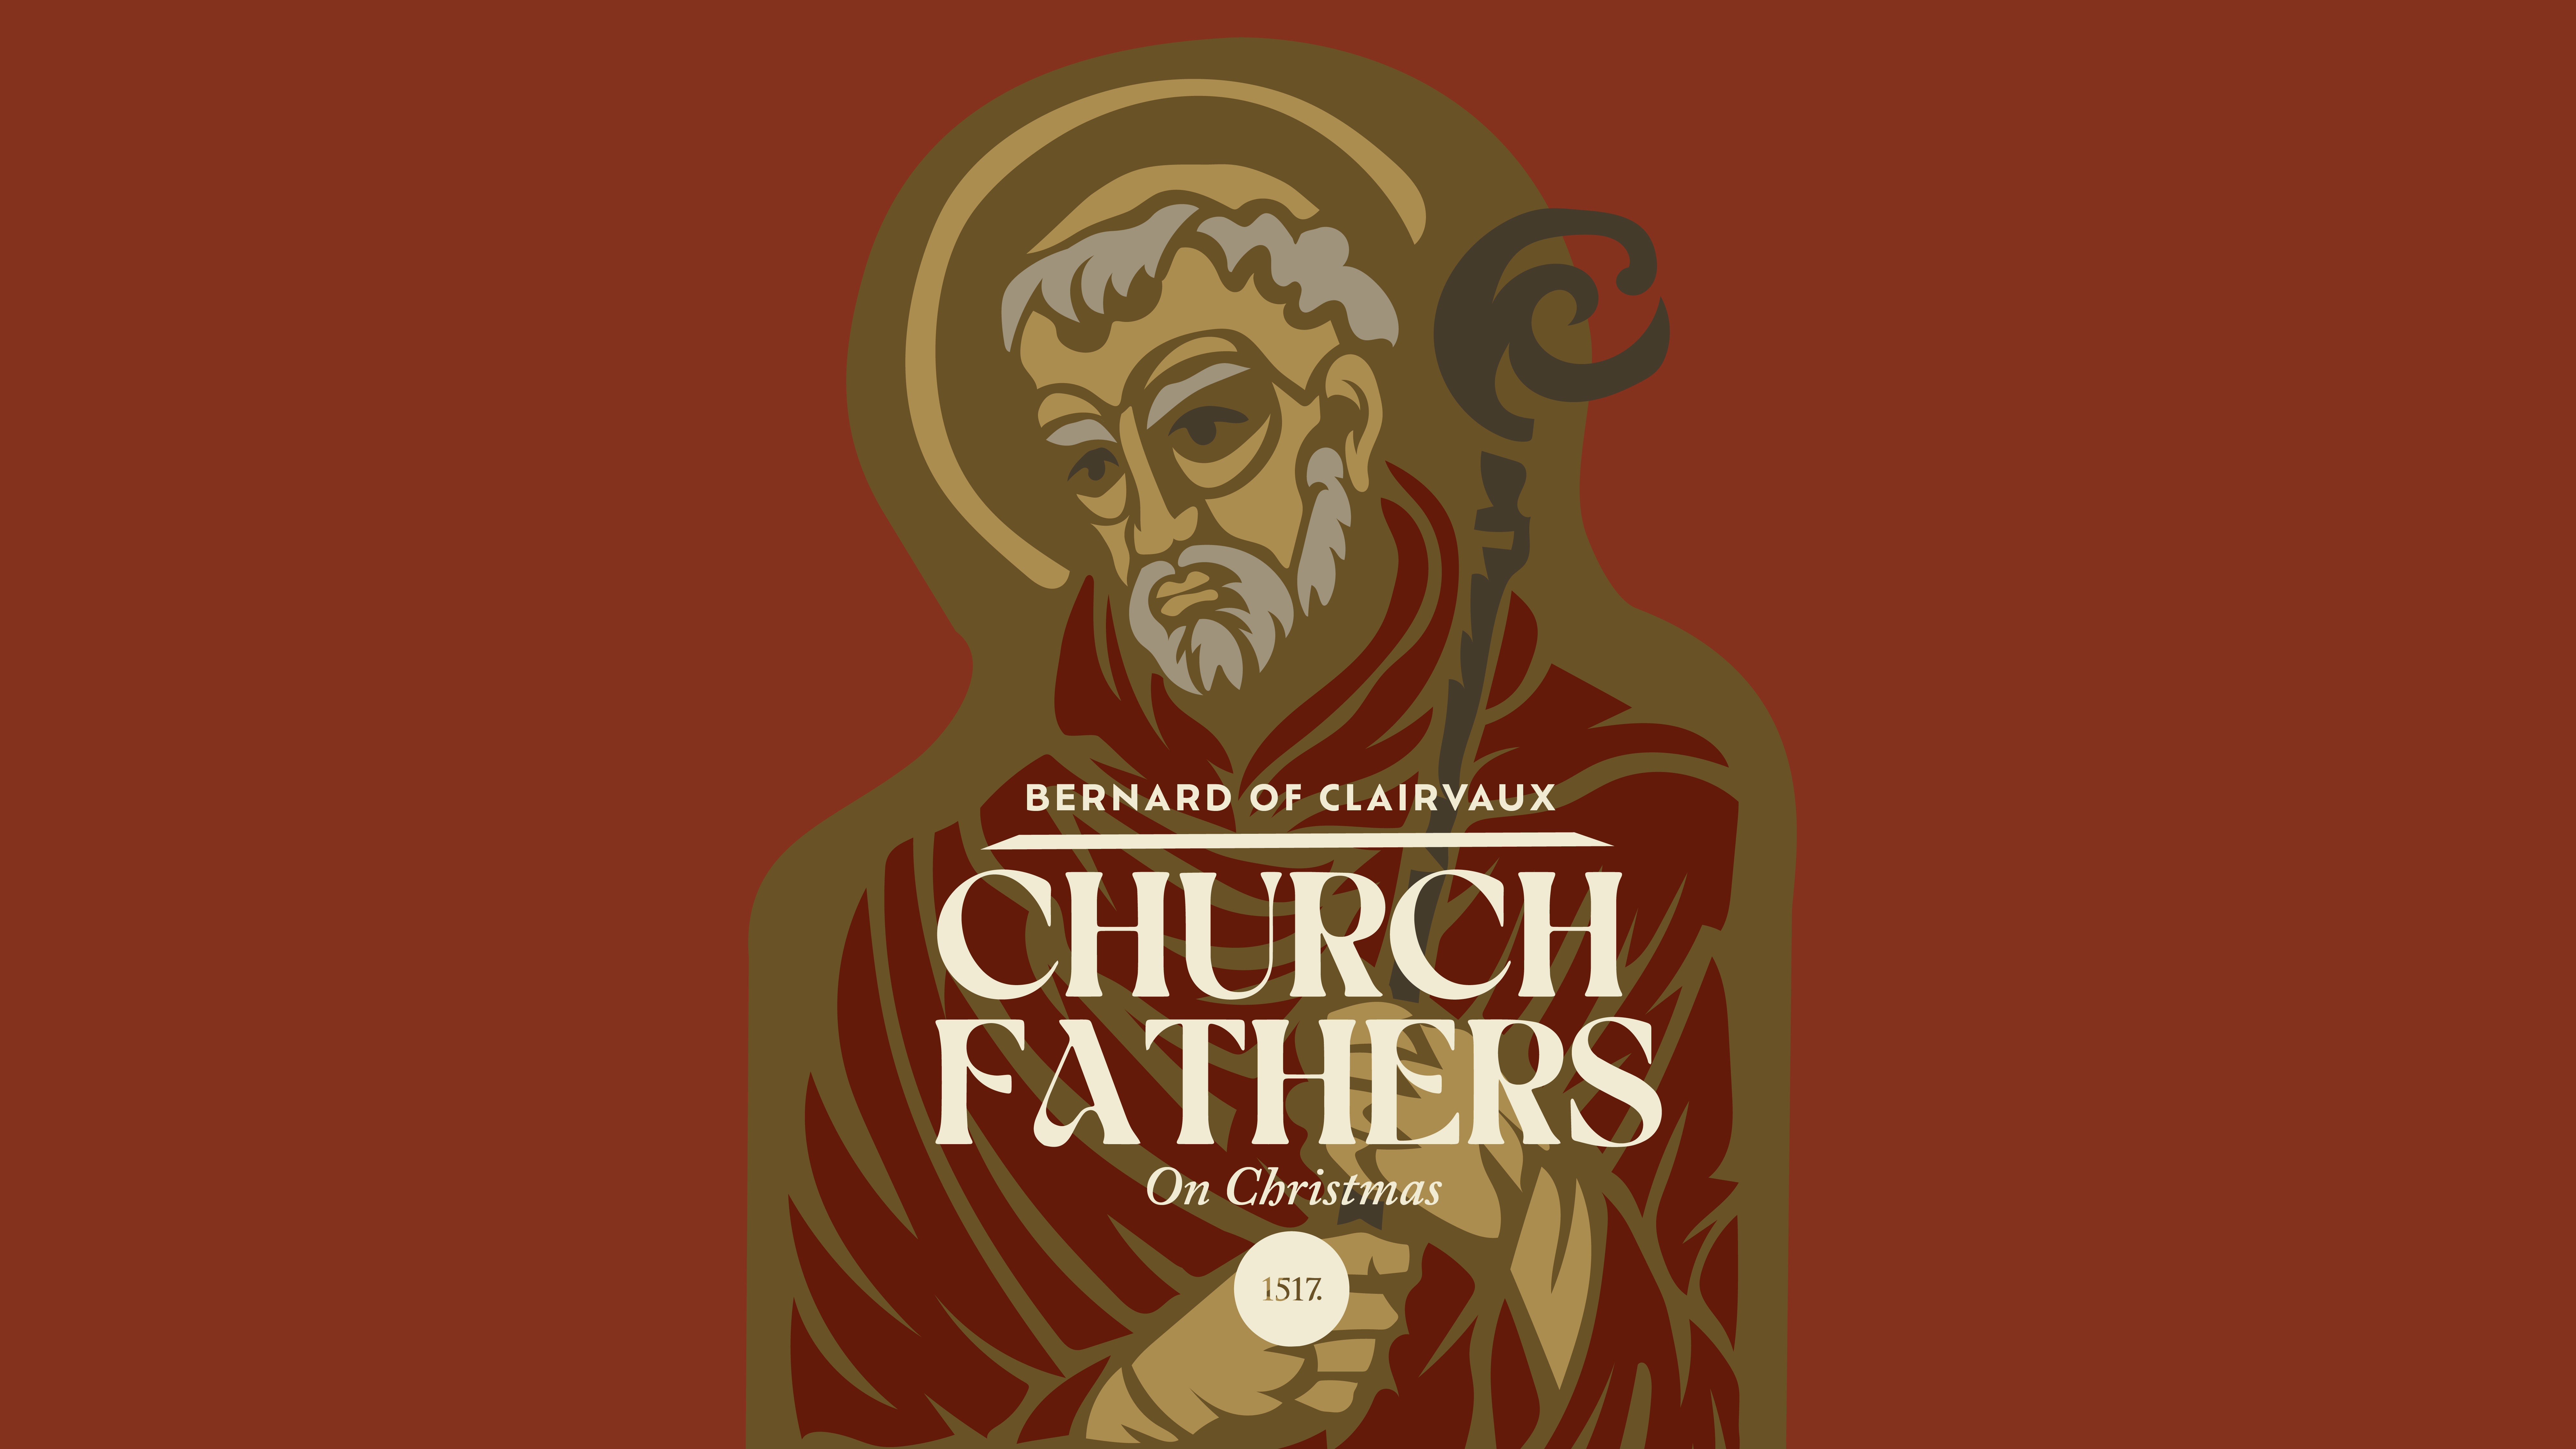 Church Fathers on Christmas: St. Bernard of Clairvoux